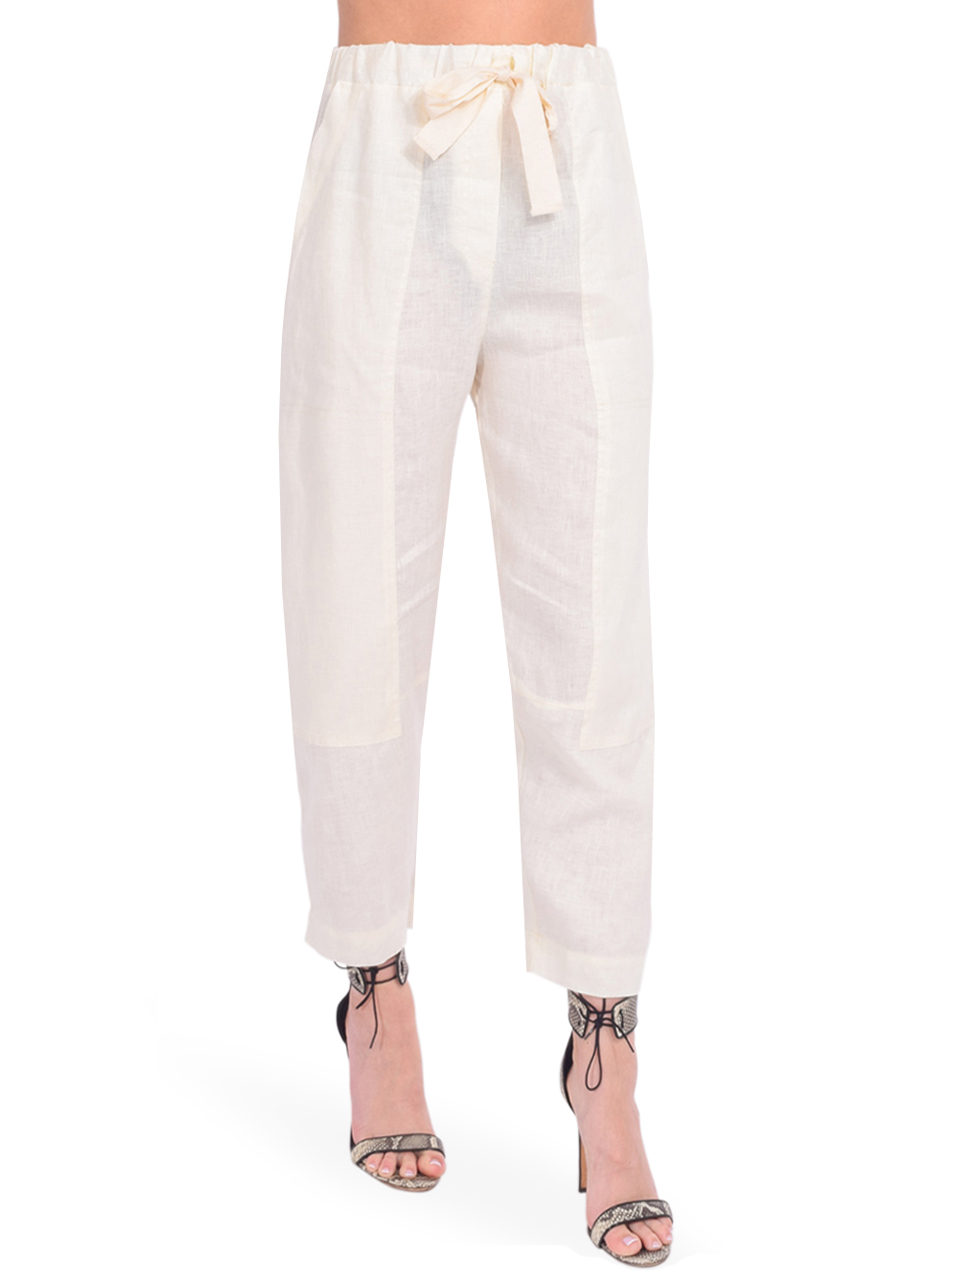 Ottod'Ame Linen Pant in White Side View 